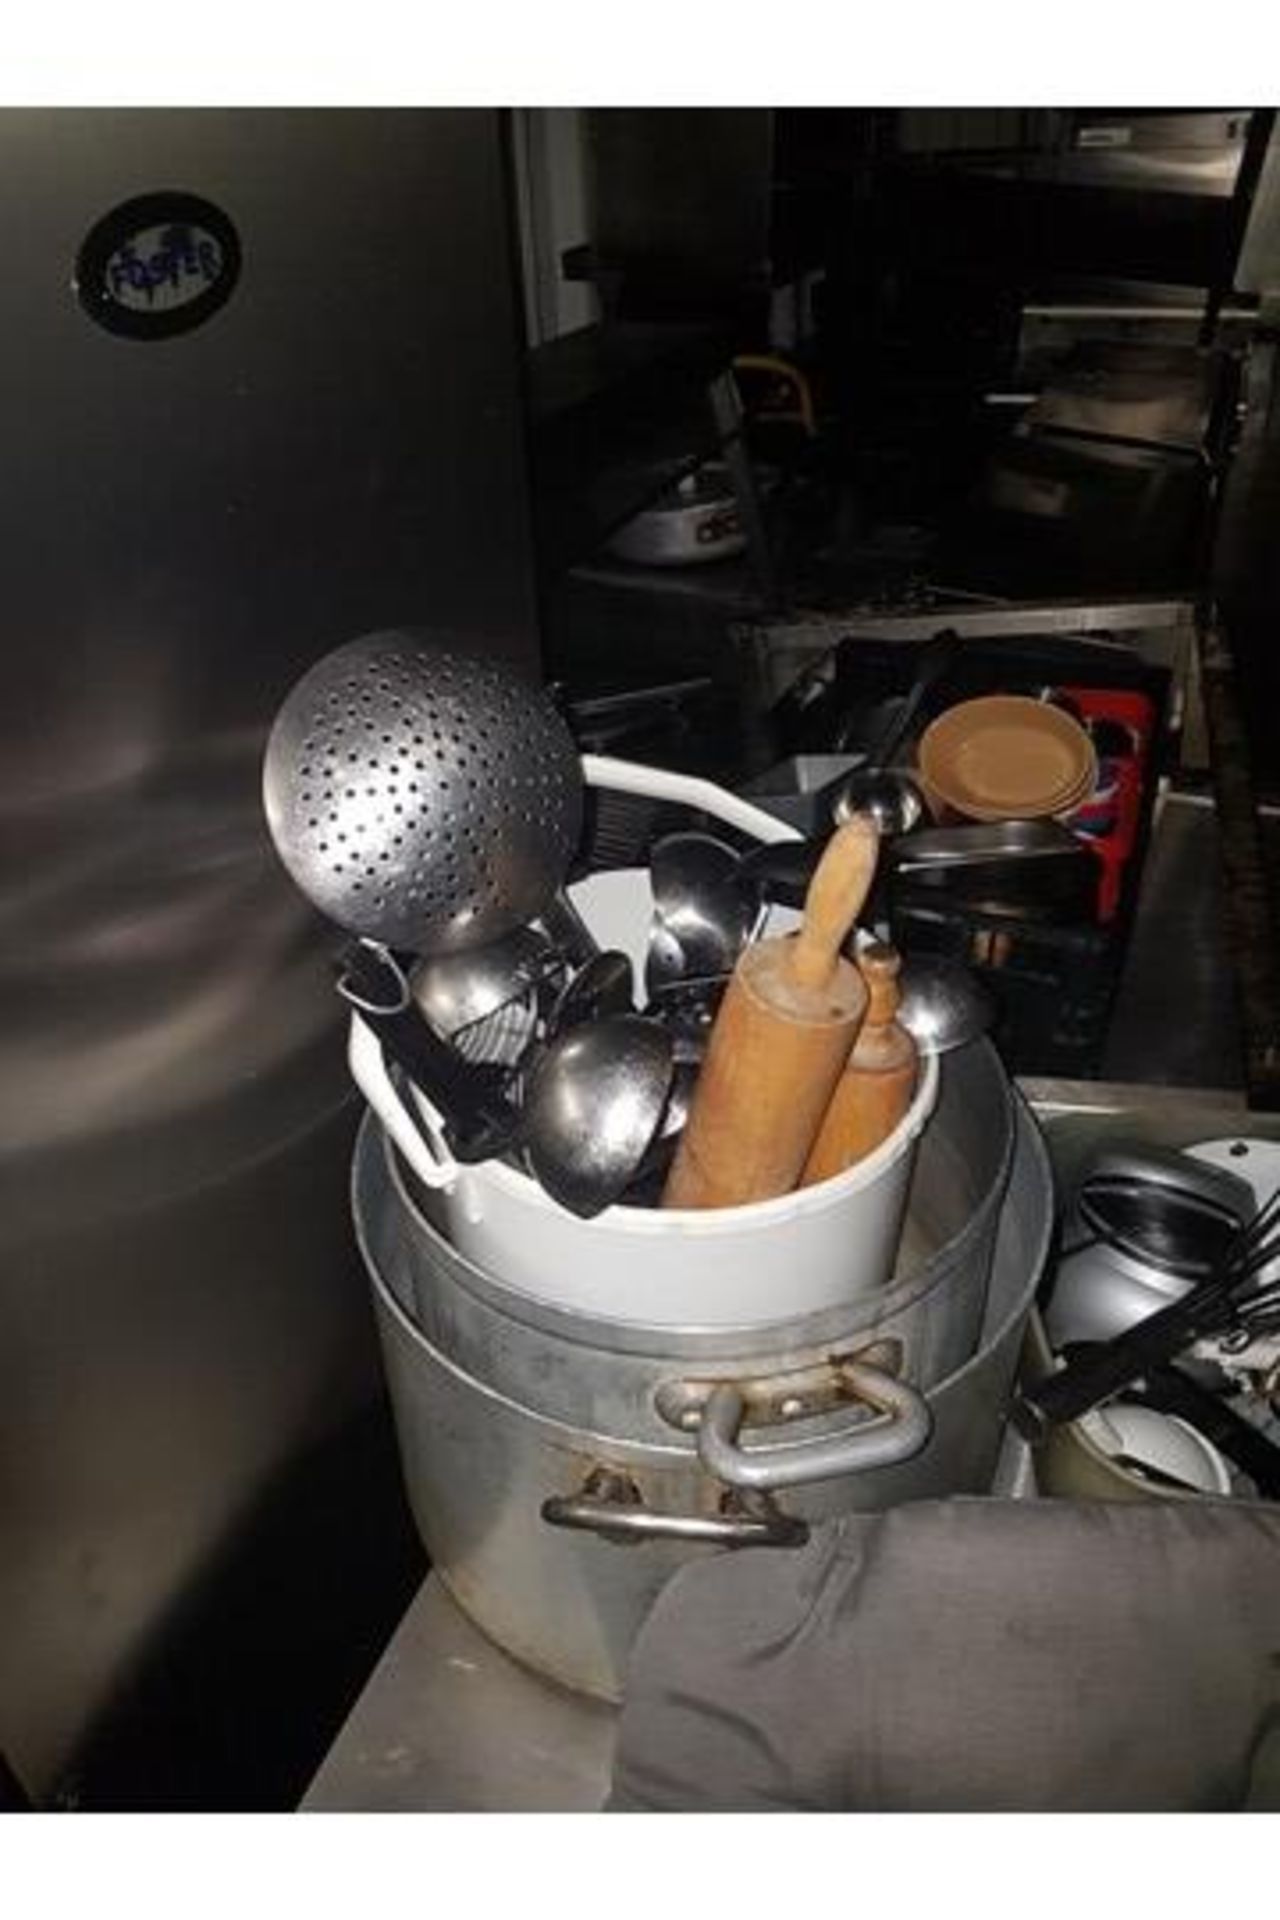 x 2 Stainless Steel Pans and Utensils - Image 2 of 2